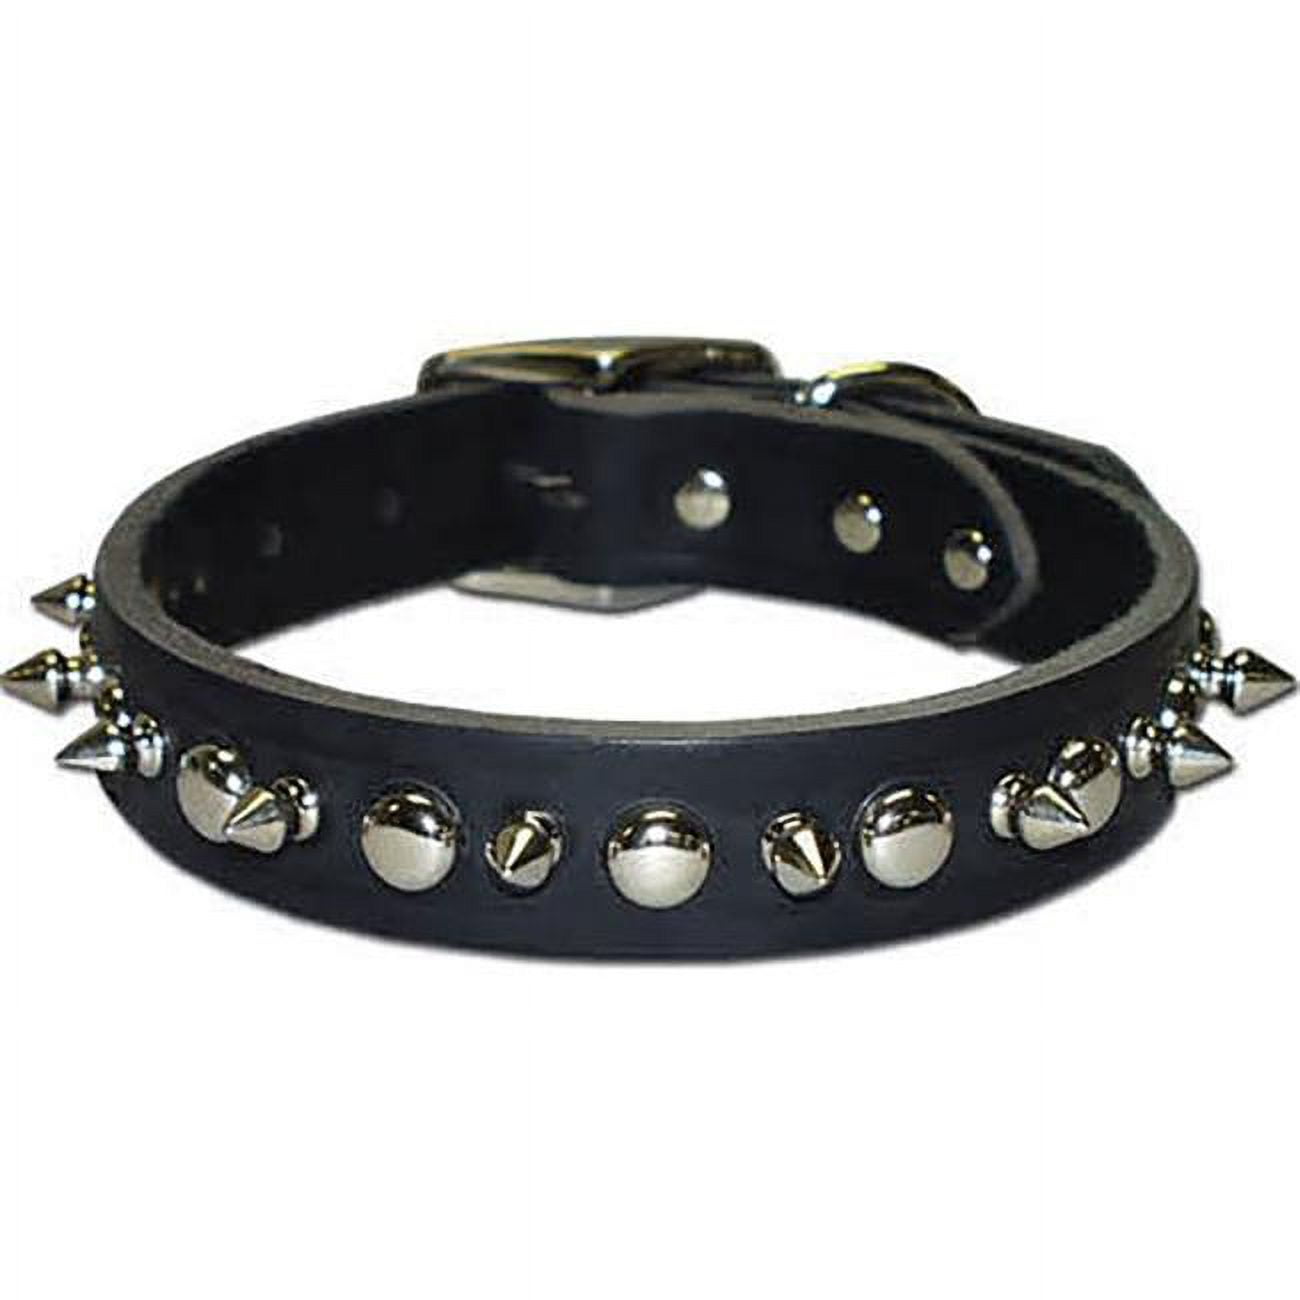 Picture of Leather Brothers 100LKS-BK24 1 x 24 in. Latigo Leather 1 Ply Spiked Dog Collar, Black